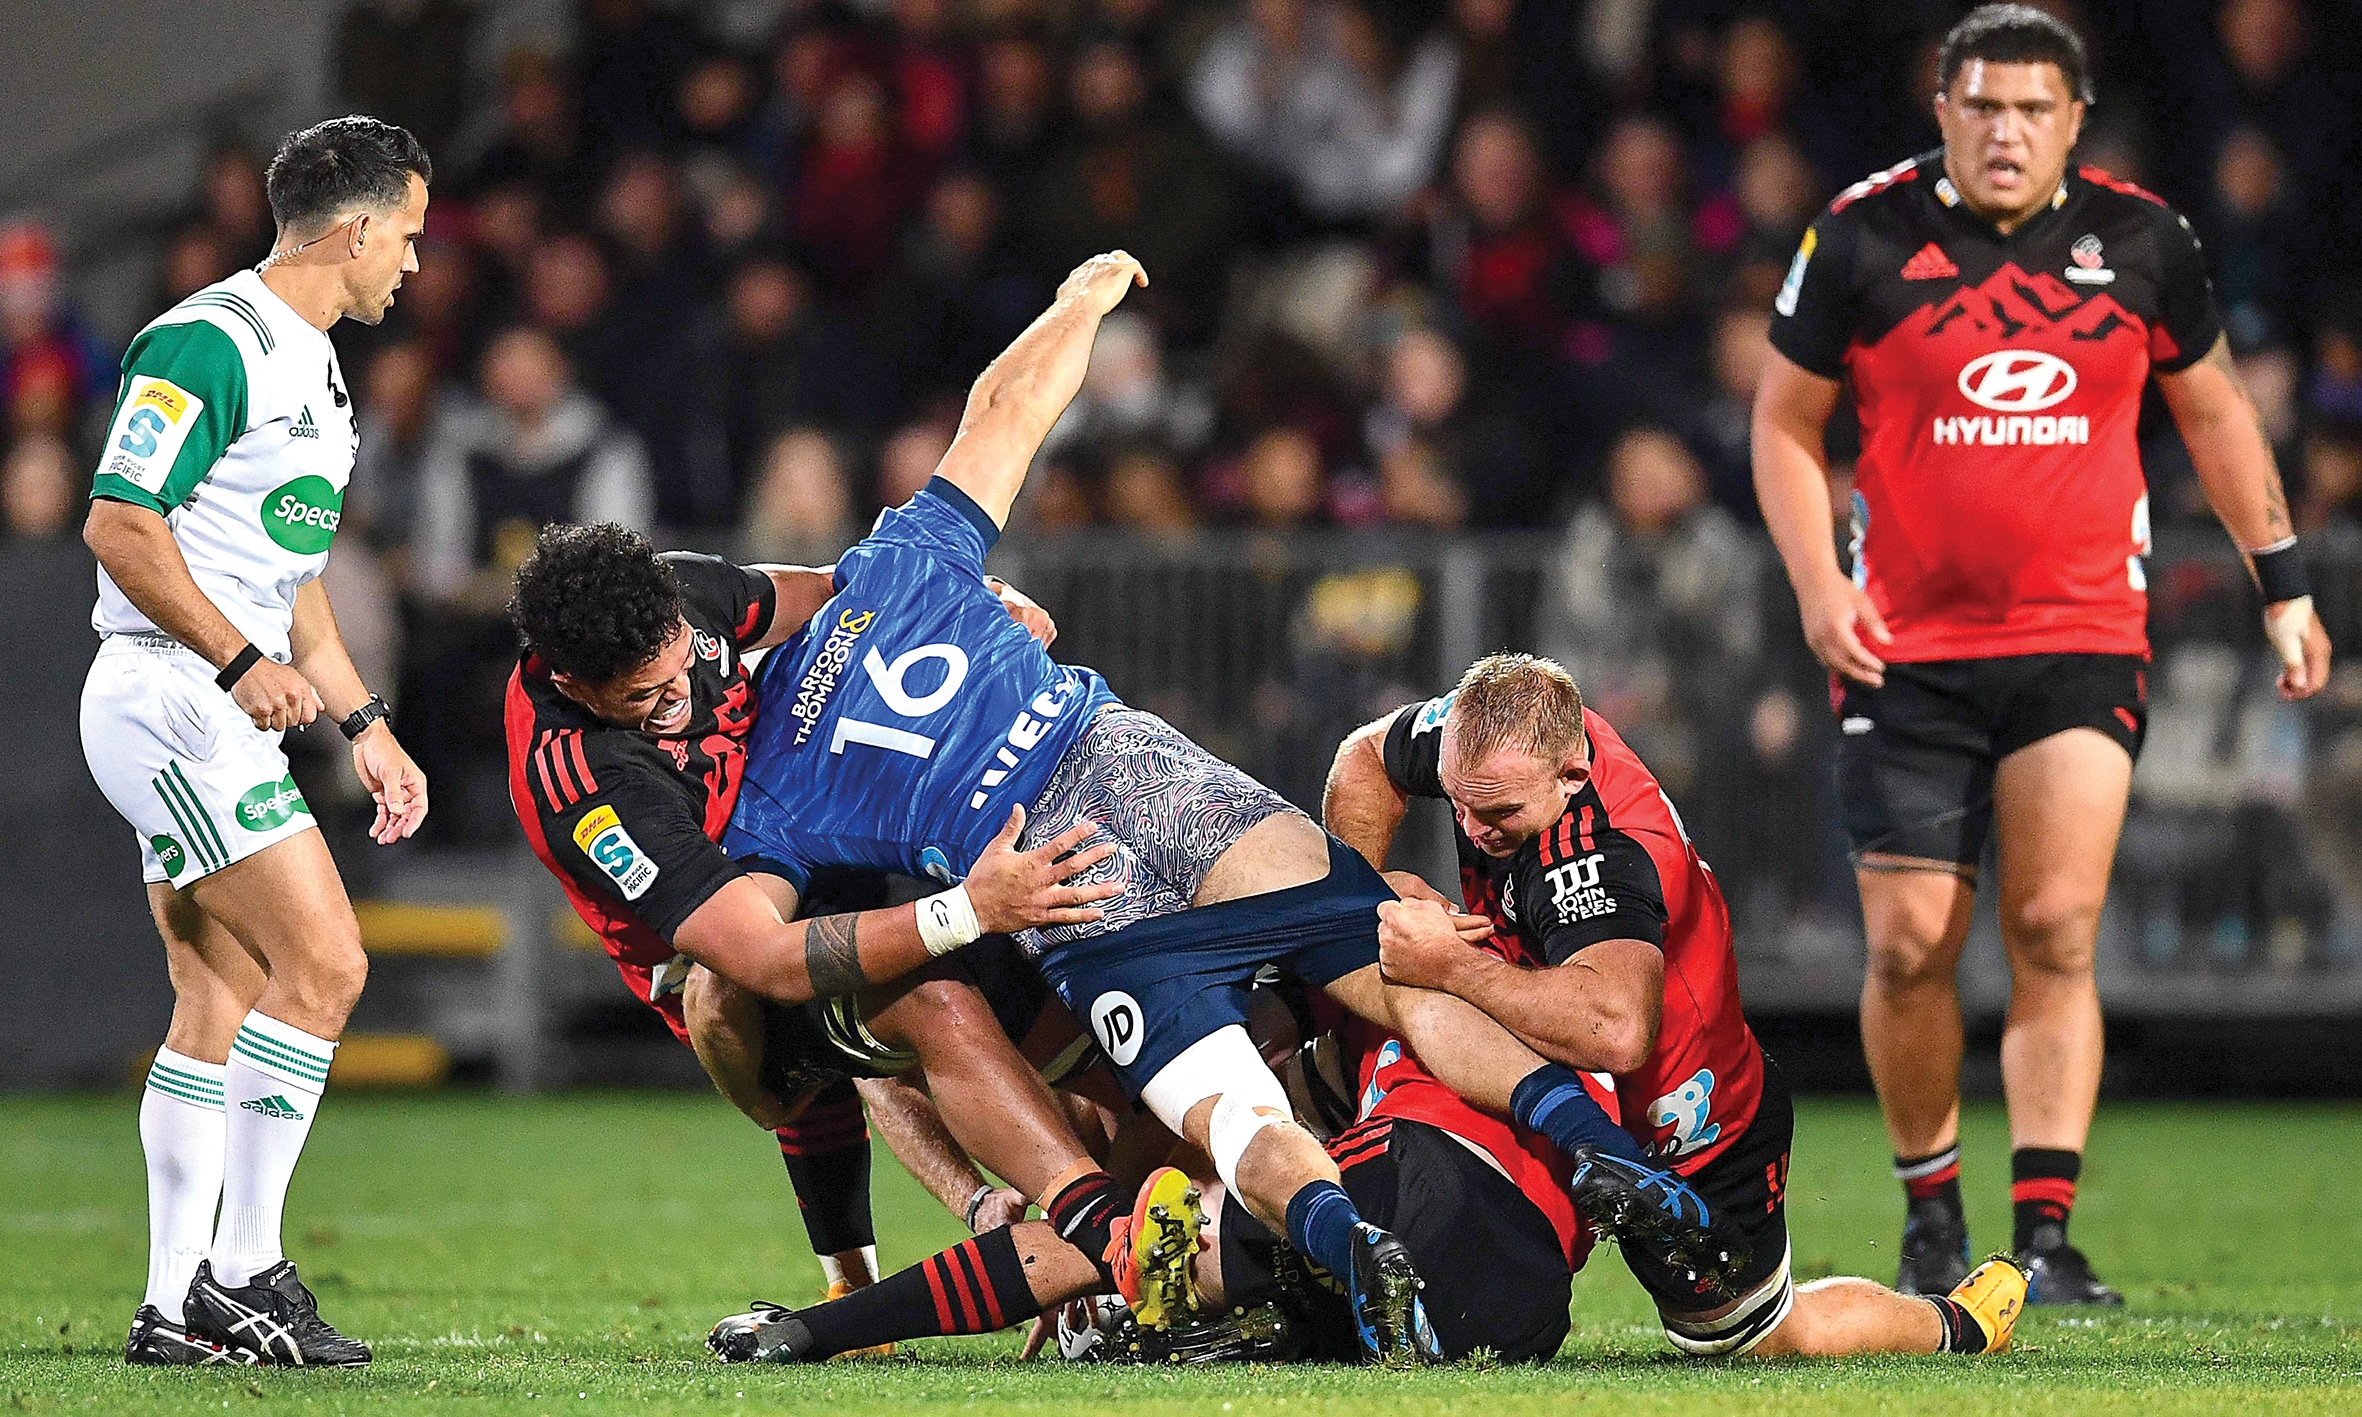 Blues' Kurt Eklund (C) gets tackled by the Crusaders' defence during the round 12 Super Rugby Pacific match between Crusaders and Blues at Orangetheory Stadium in Christchurch on May 13, 2023. (Photo by Sanka Vidanagama / AFP)